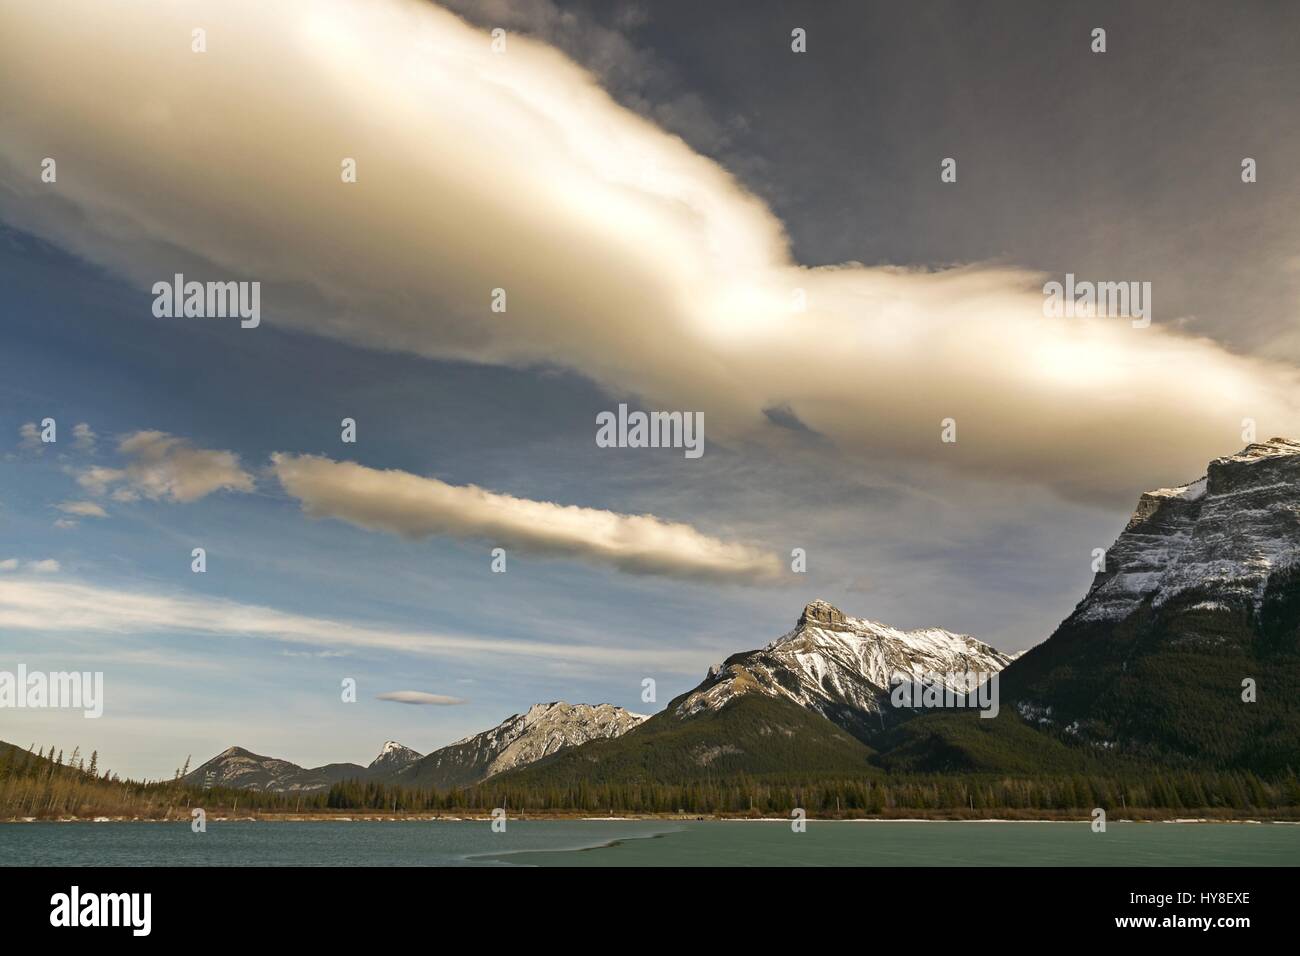 Cloud Formation Chinook Alberta Foothills Canada Rocky Mountains Stock Photo